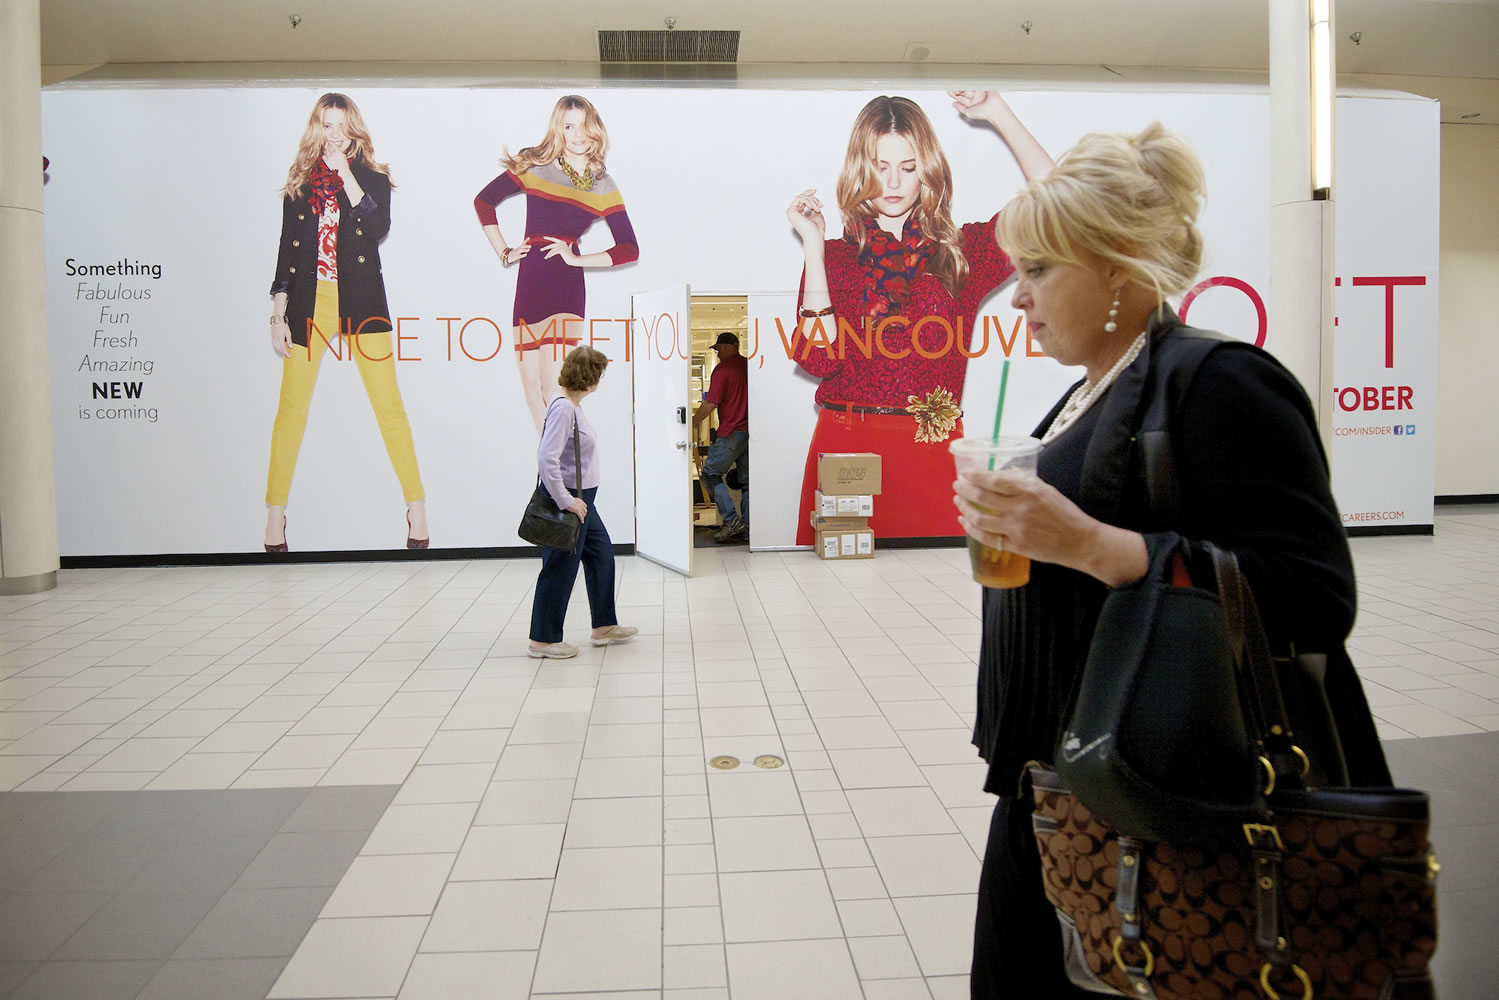 Shoppers walk past a temporary store front at Westfield Vancouver mall, which opened a slate of new stores and a new Cinetopia multiplex as part of its multi-million dollar remodel in 2012.